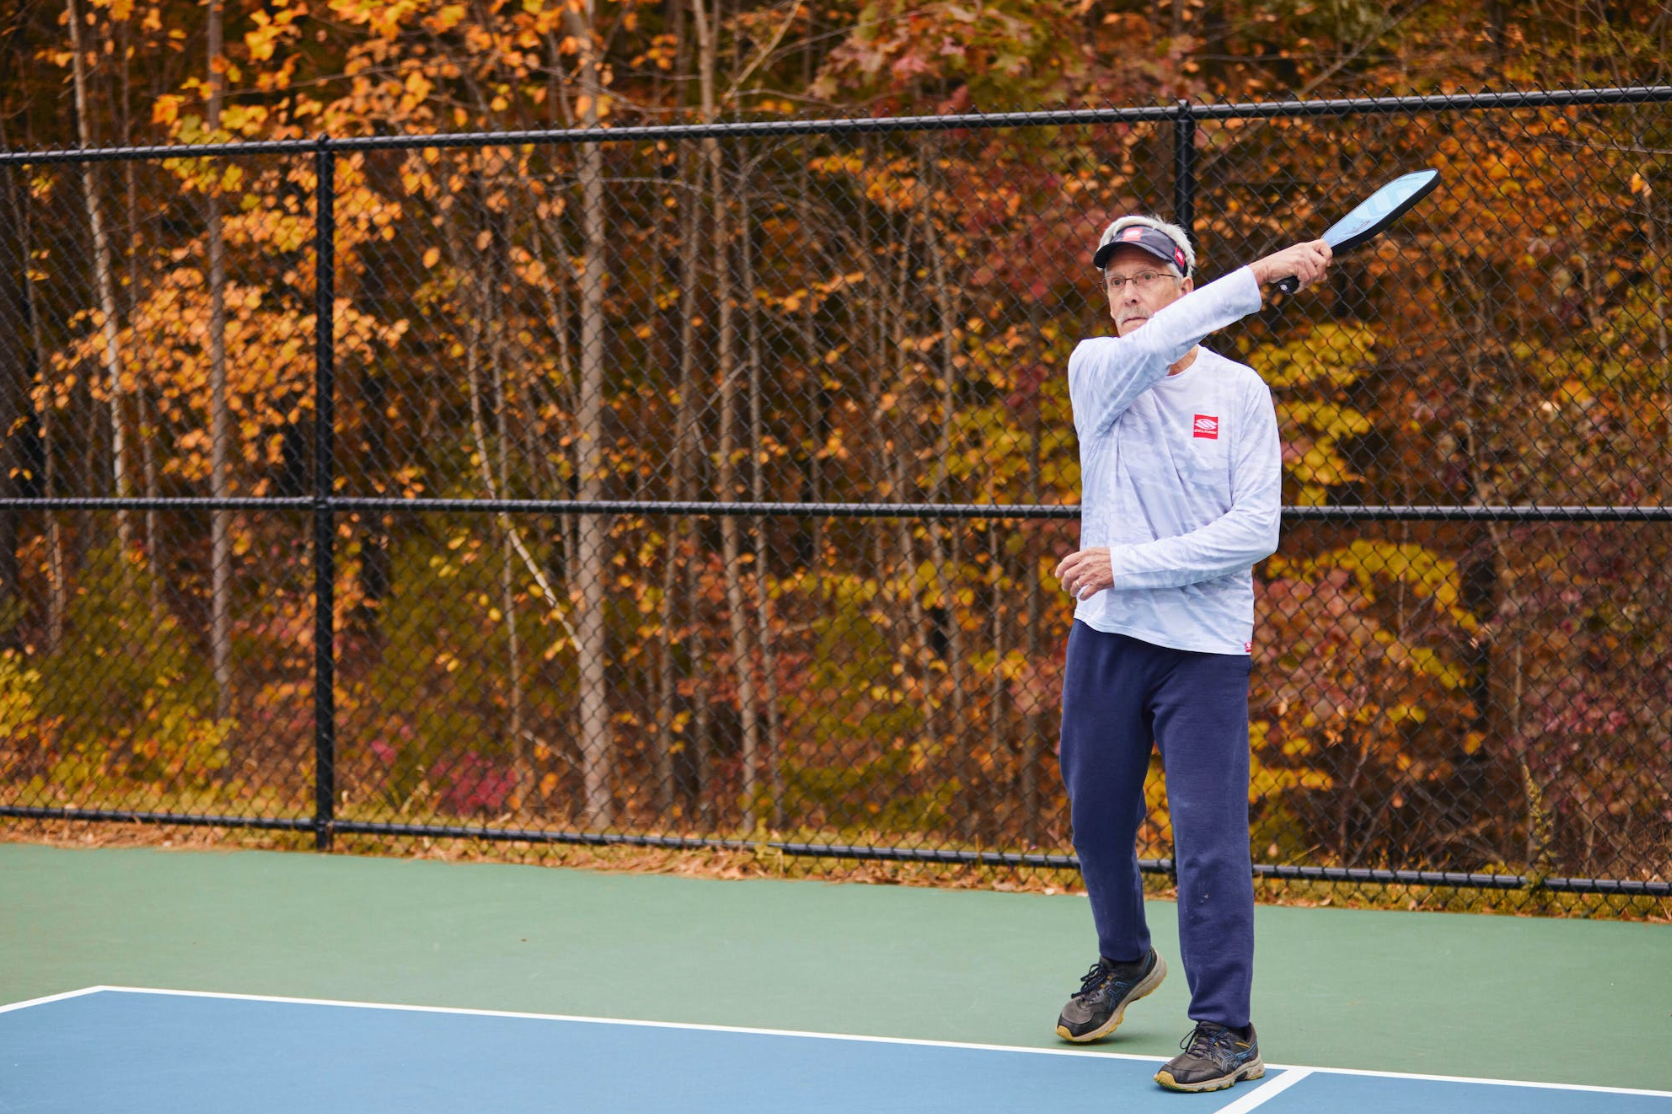 5 Tips for Intermediate Pickleball Players to Improve Your Game